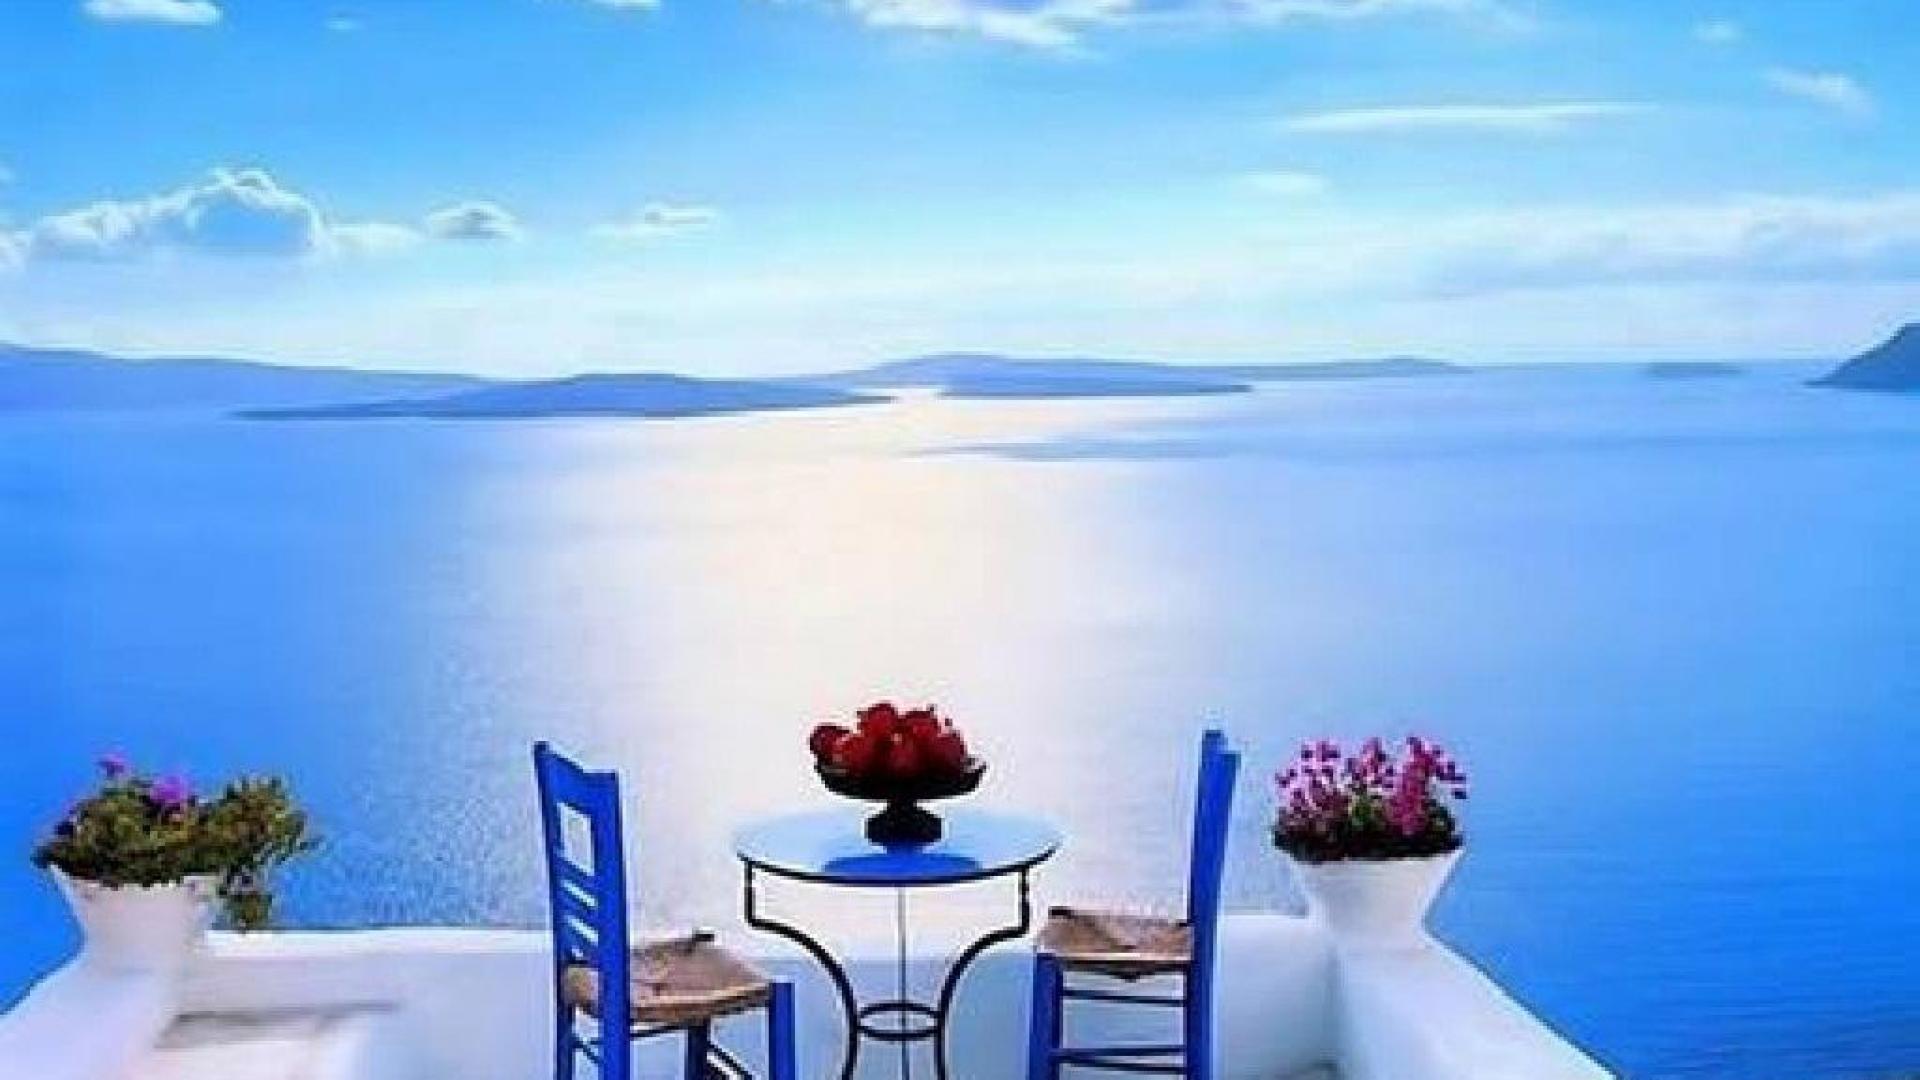 Day On Santorini High Quality And Resolution Wallpaper